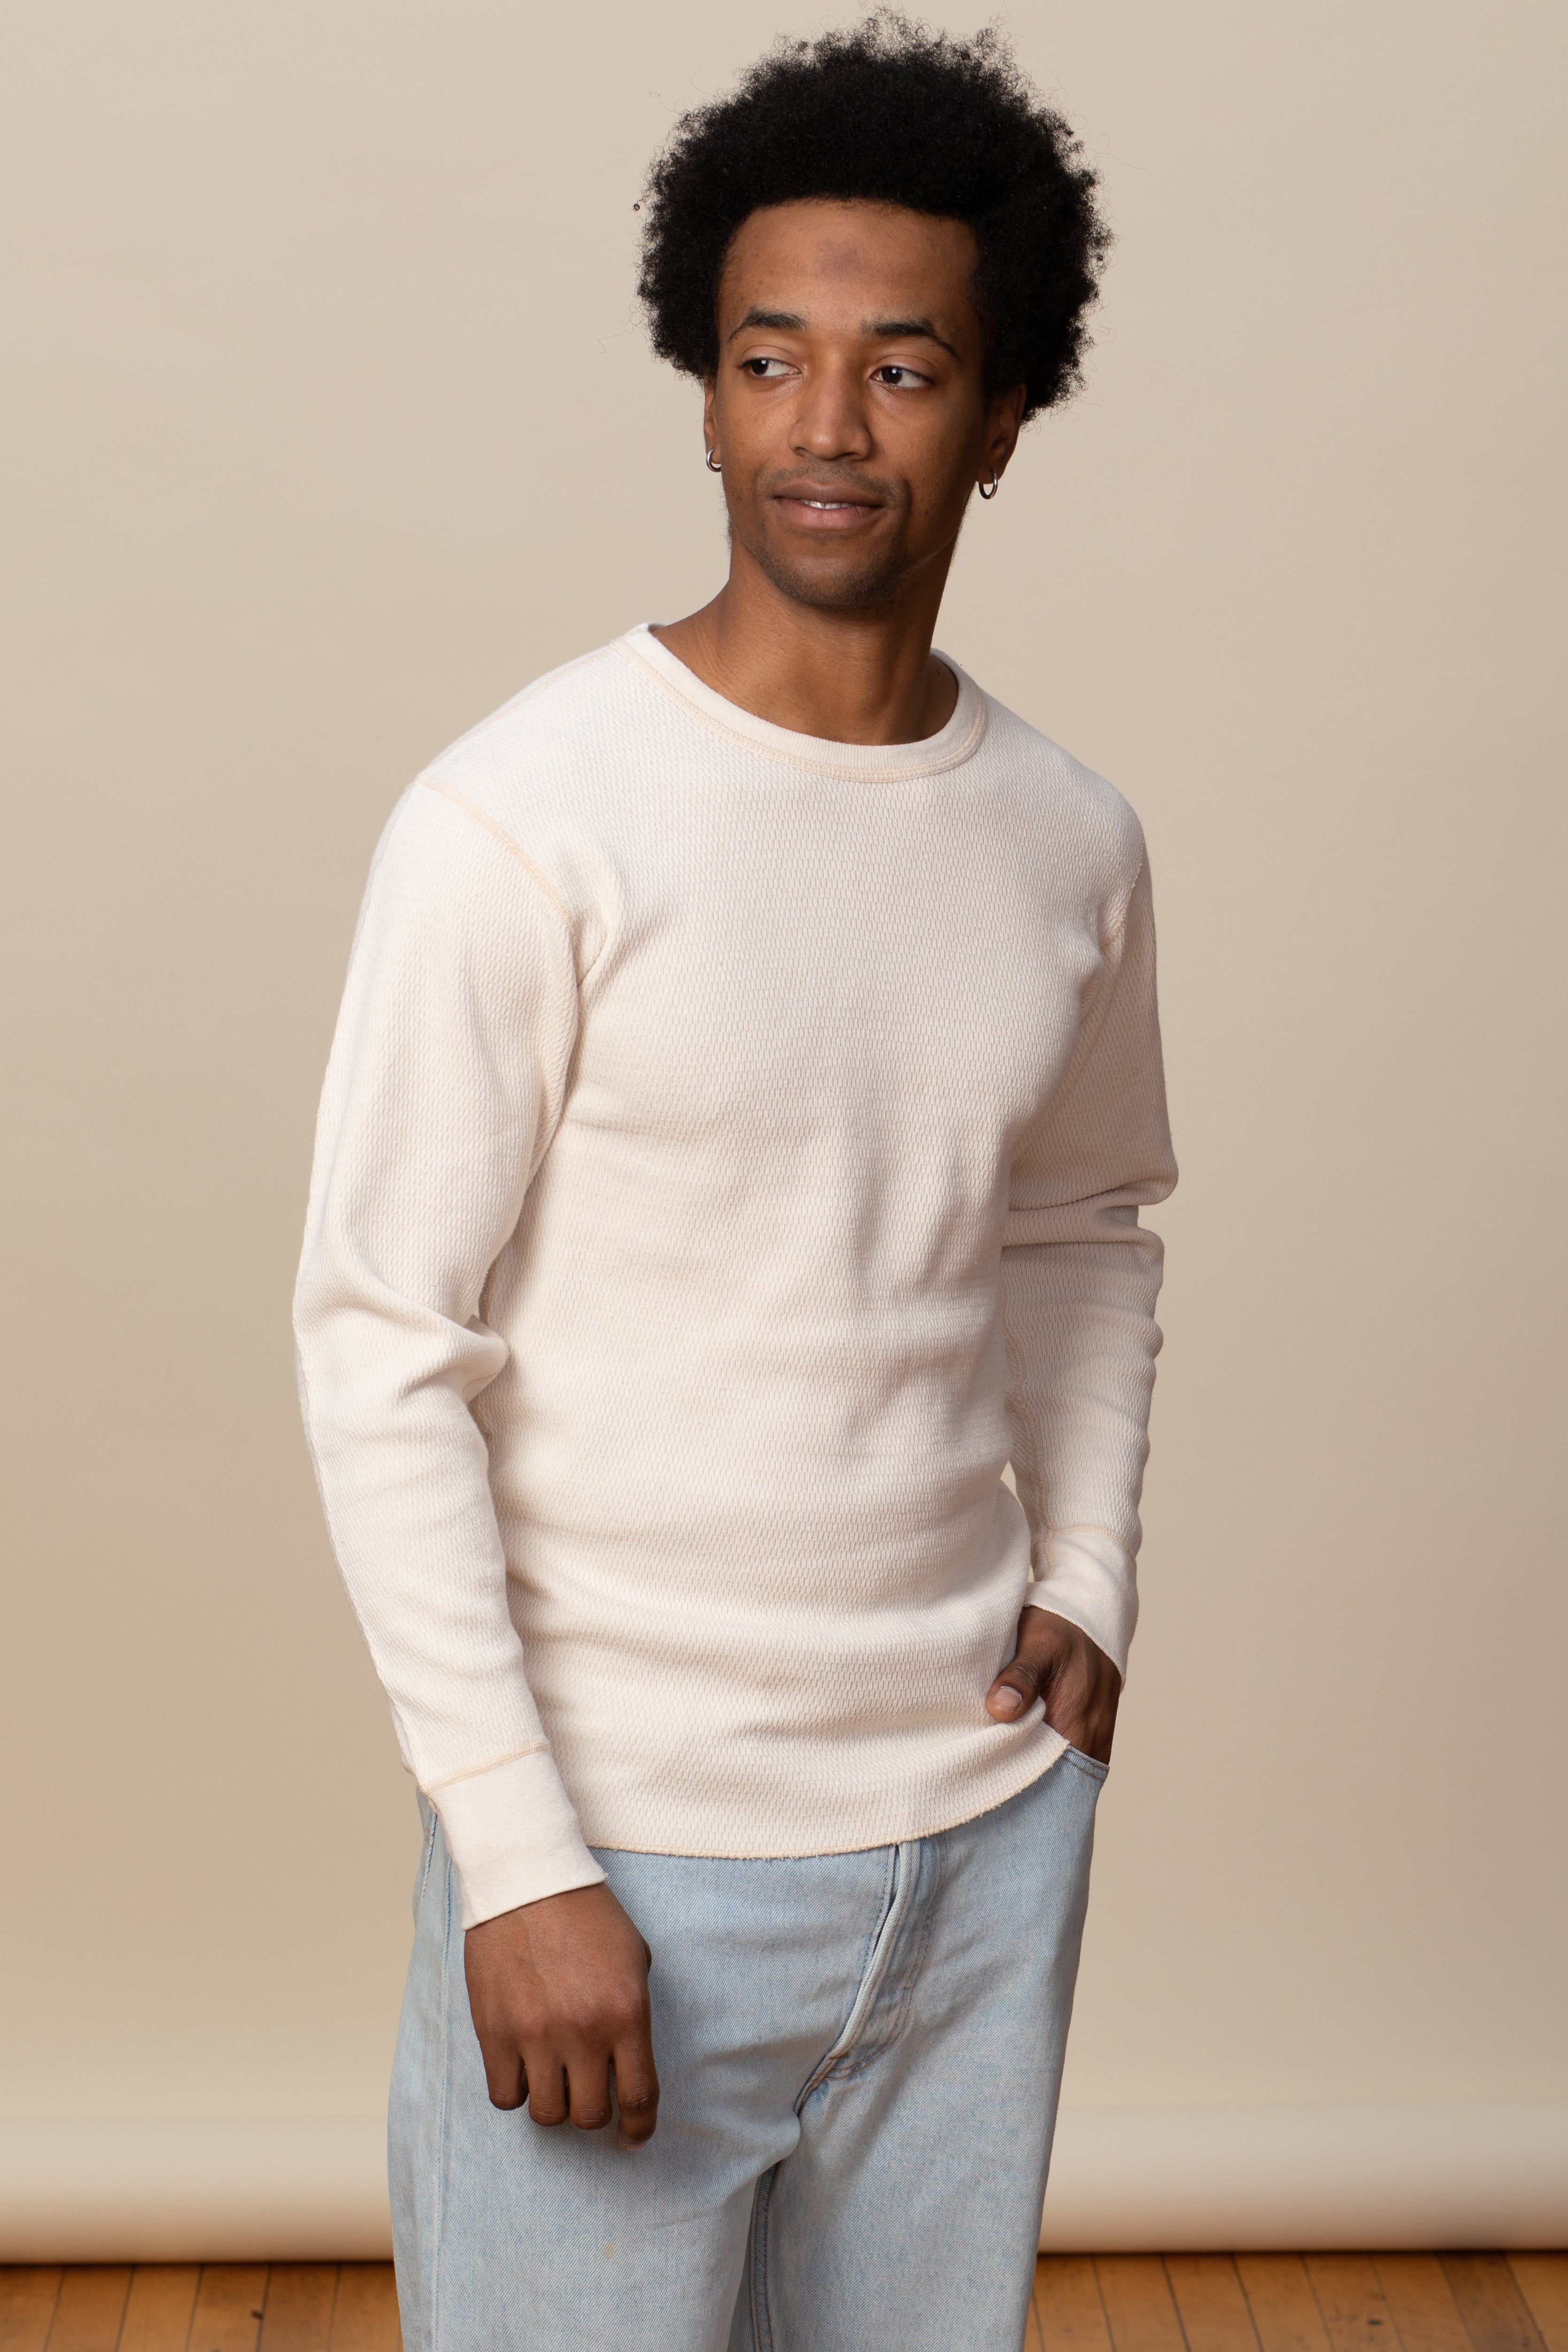 Shop Ribbed Thermal T-Shirt with Round Neck and Long Sleeves